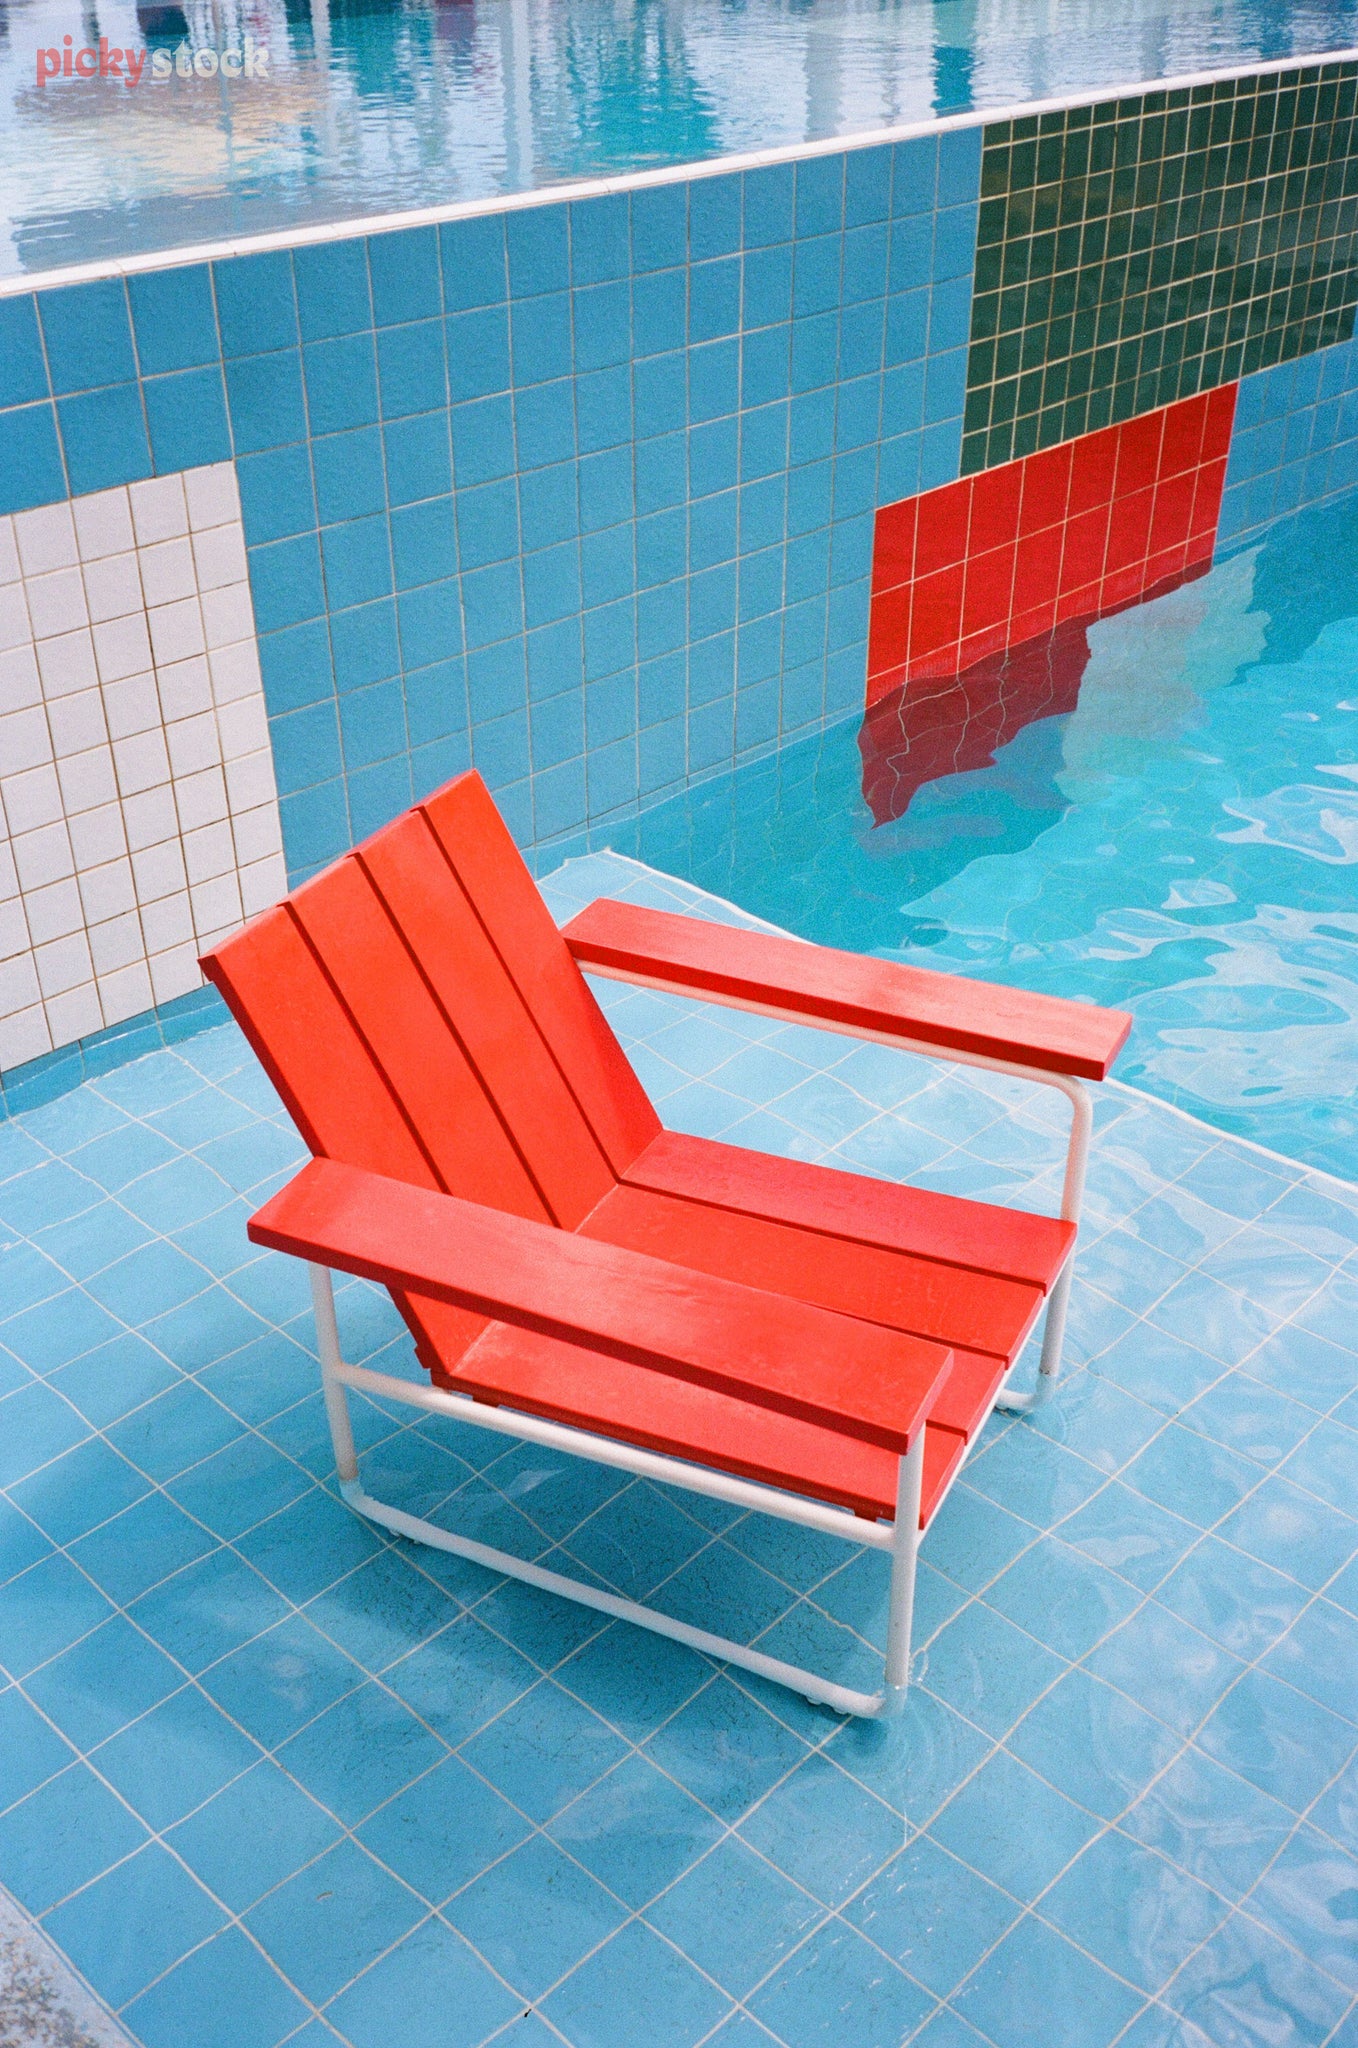 Bright red retro wooden chair sits surmerged in a blue-tiled modernist designed pool.